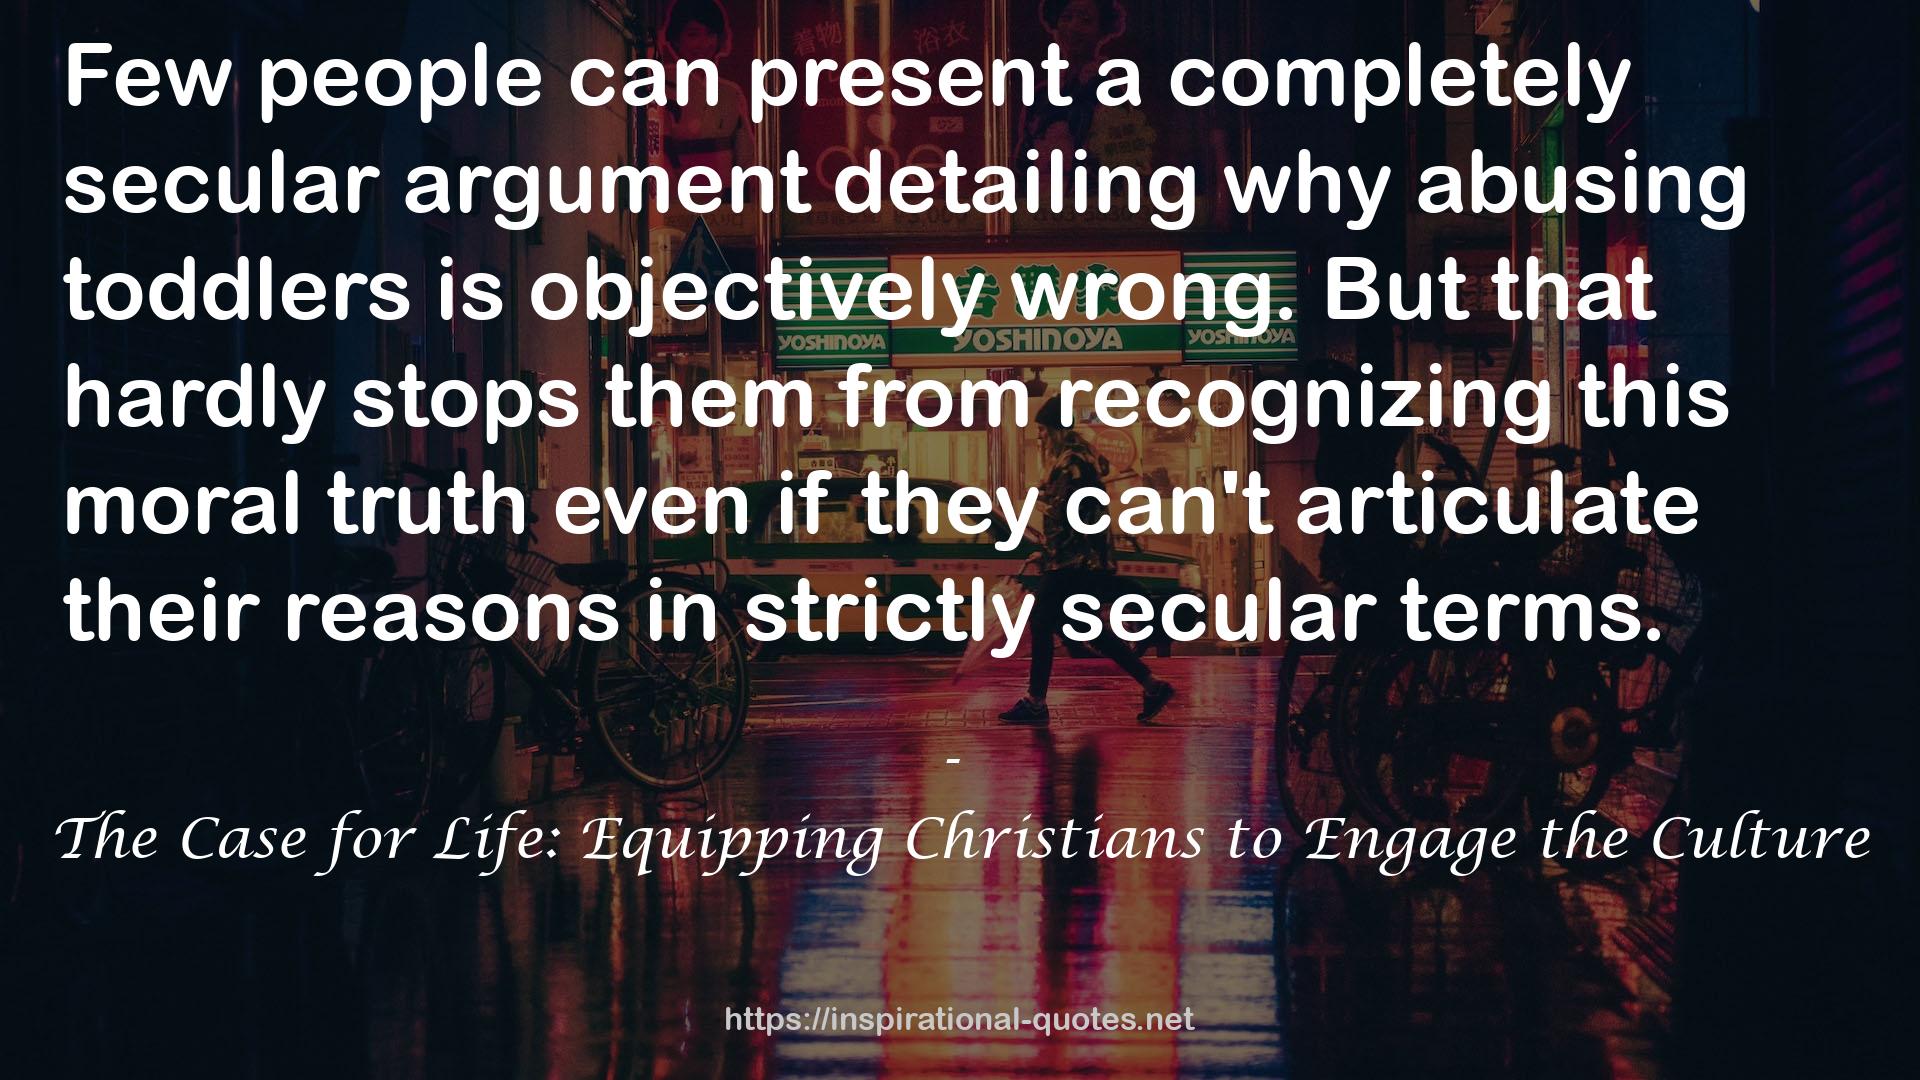 The Case for Life: Equipping Christians to Engage the Culture QUOTES